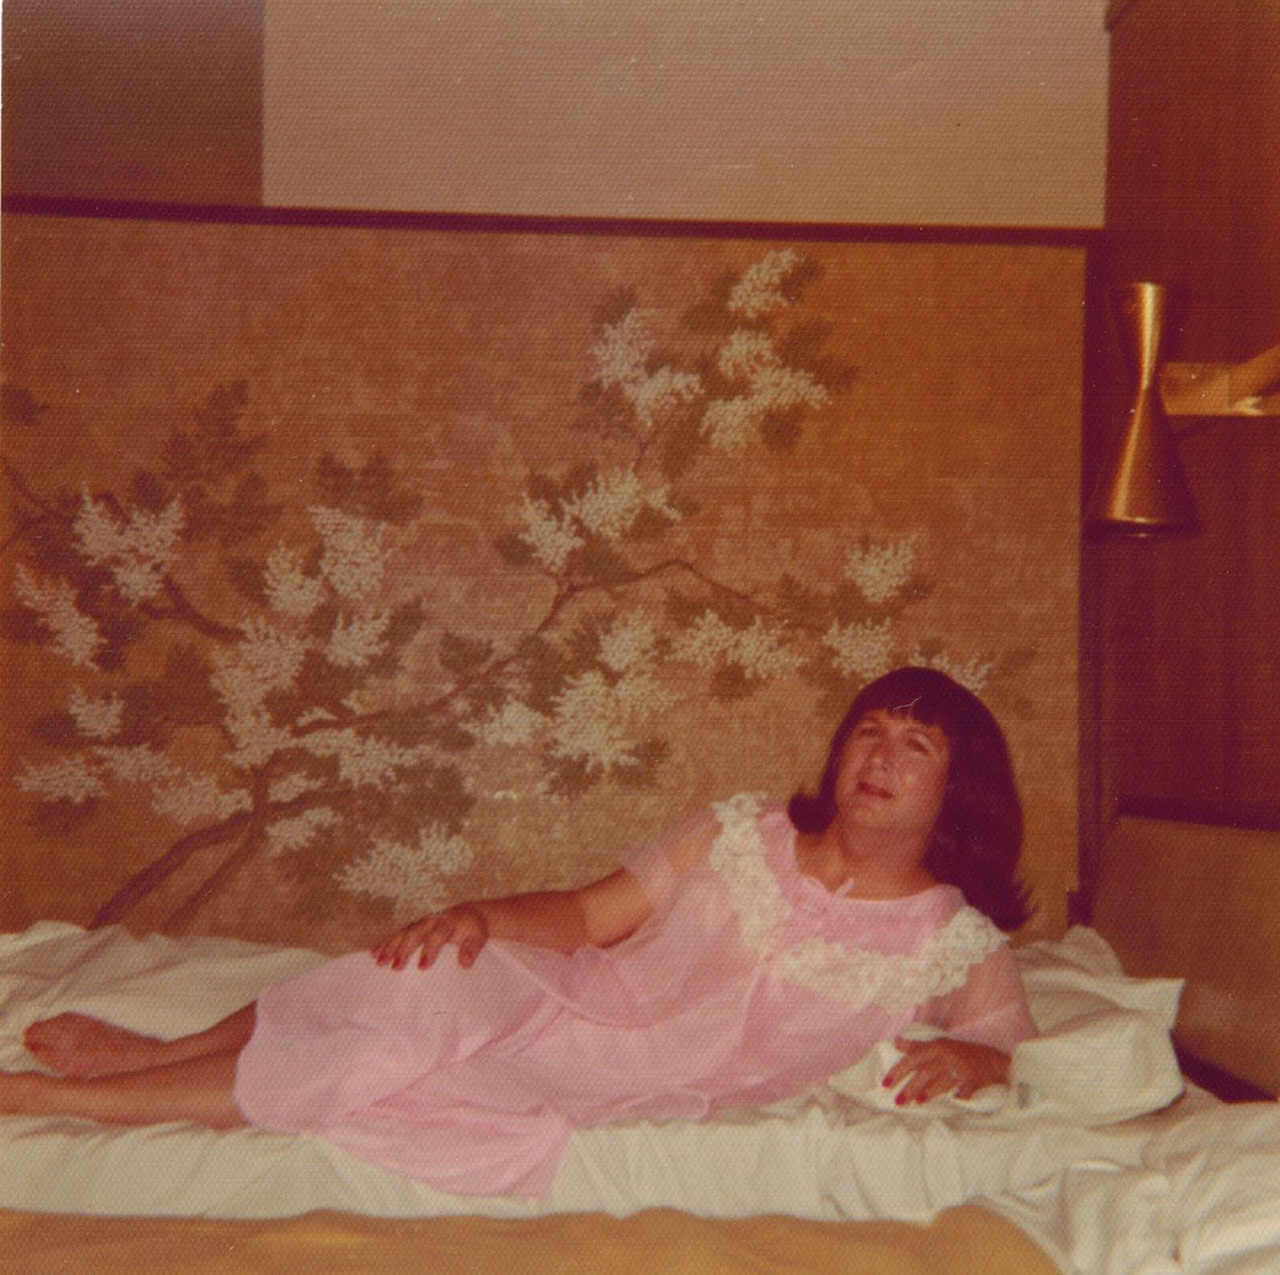 Alison Laing lying on a bed (Joseph A. Labadie Collection, University of Michigan and Digital Transgender Archive)